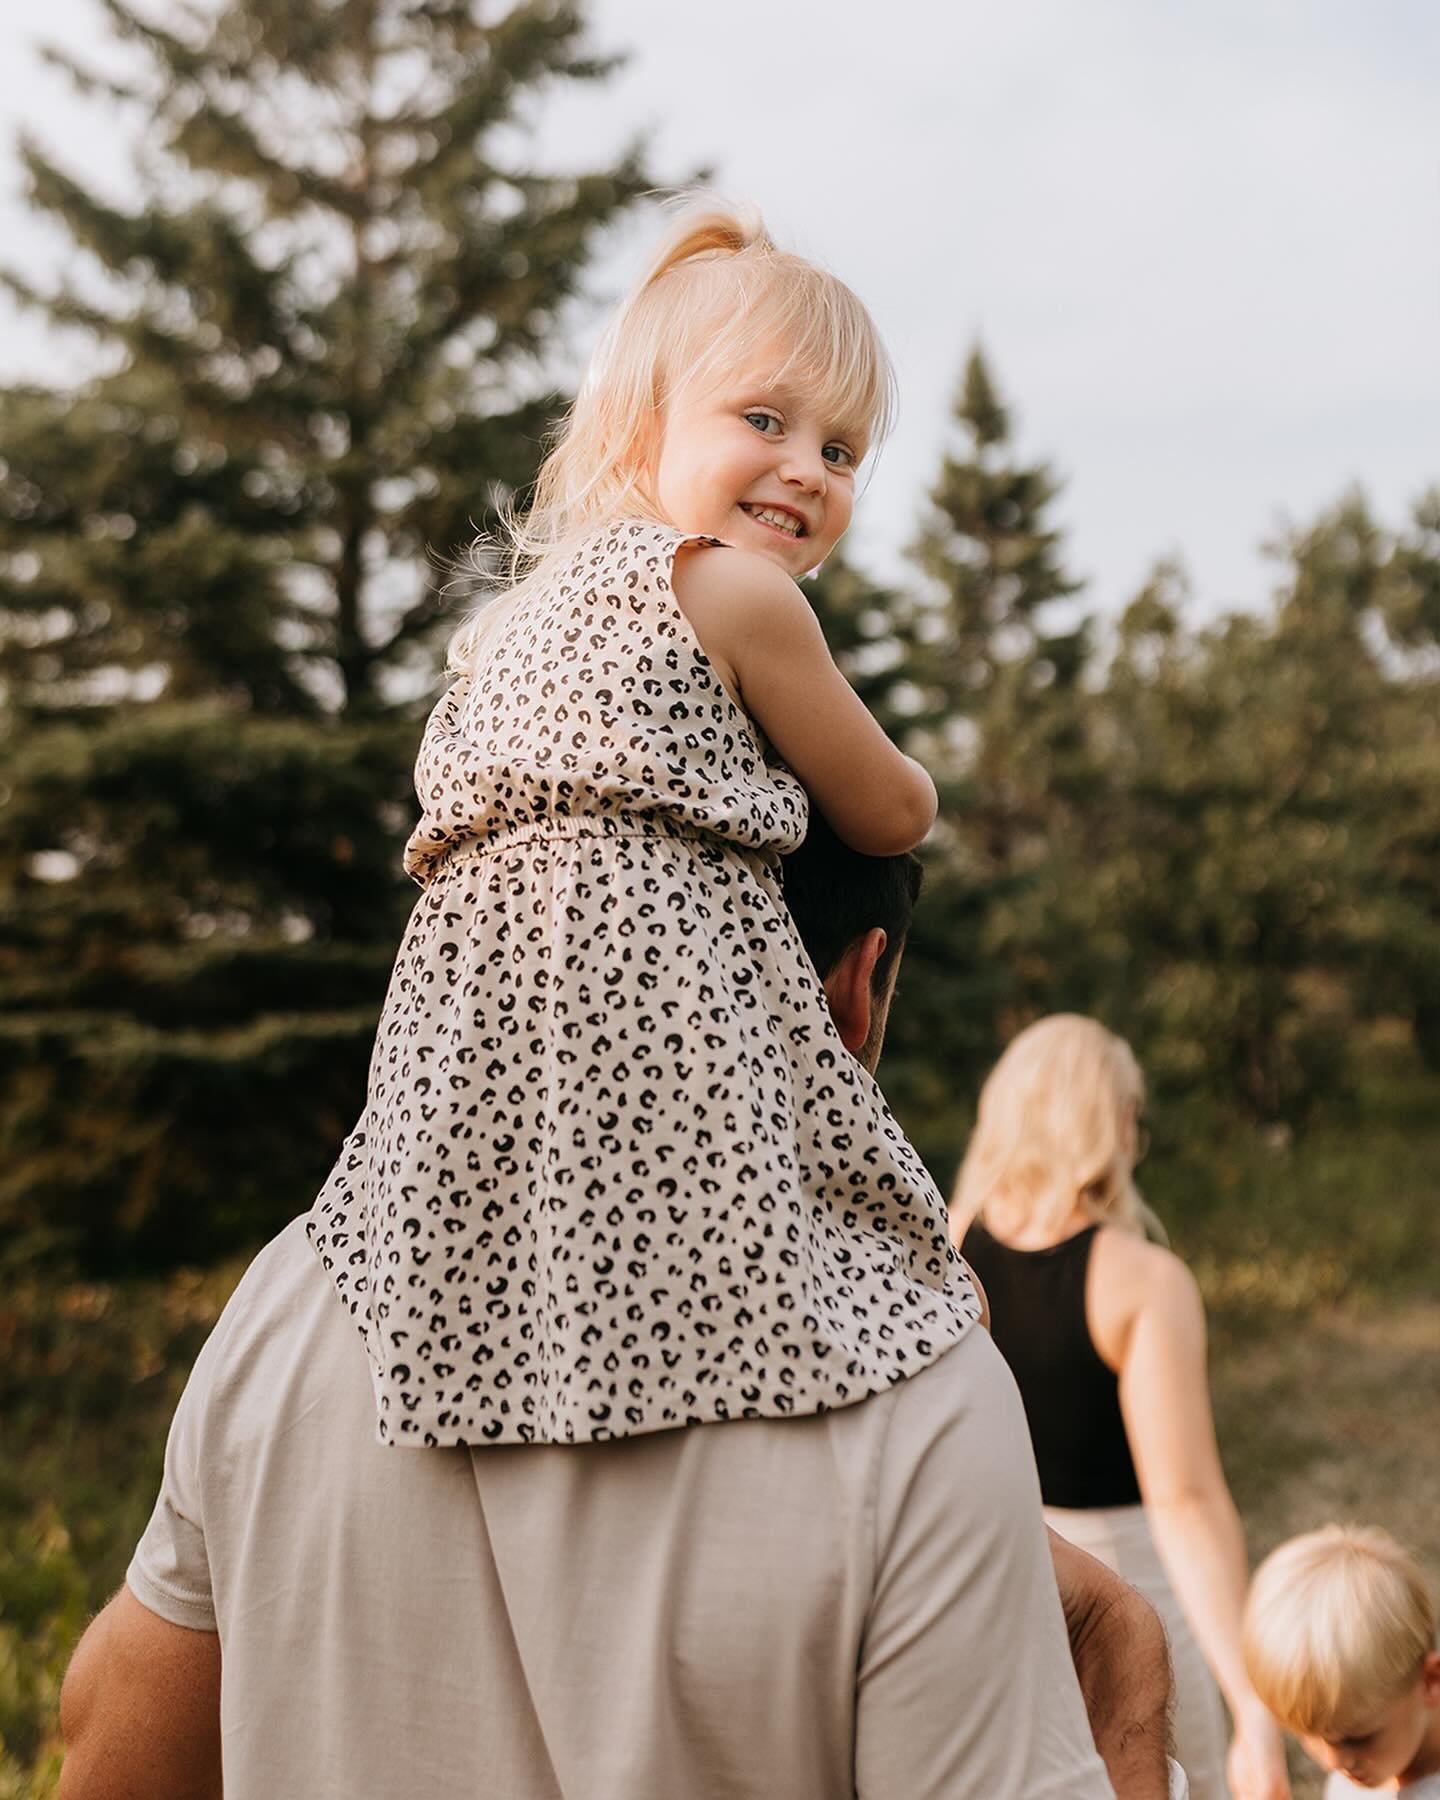 Spent the evening exploring and playing on their property as a family. The perfect way to spend your session. 🥰